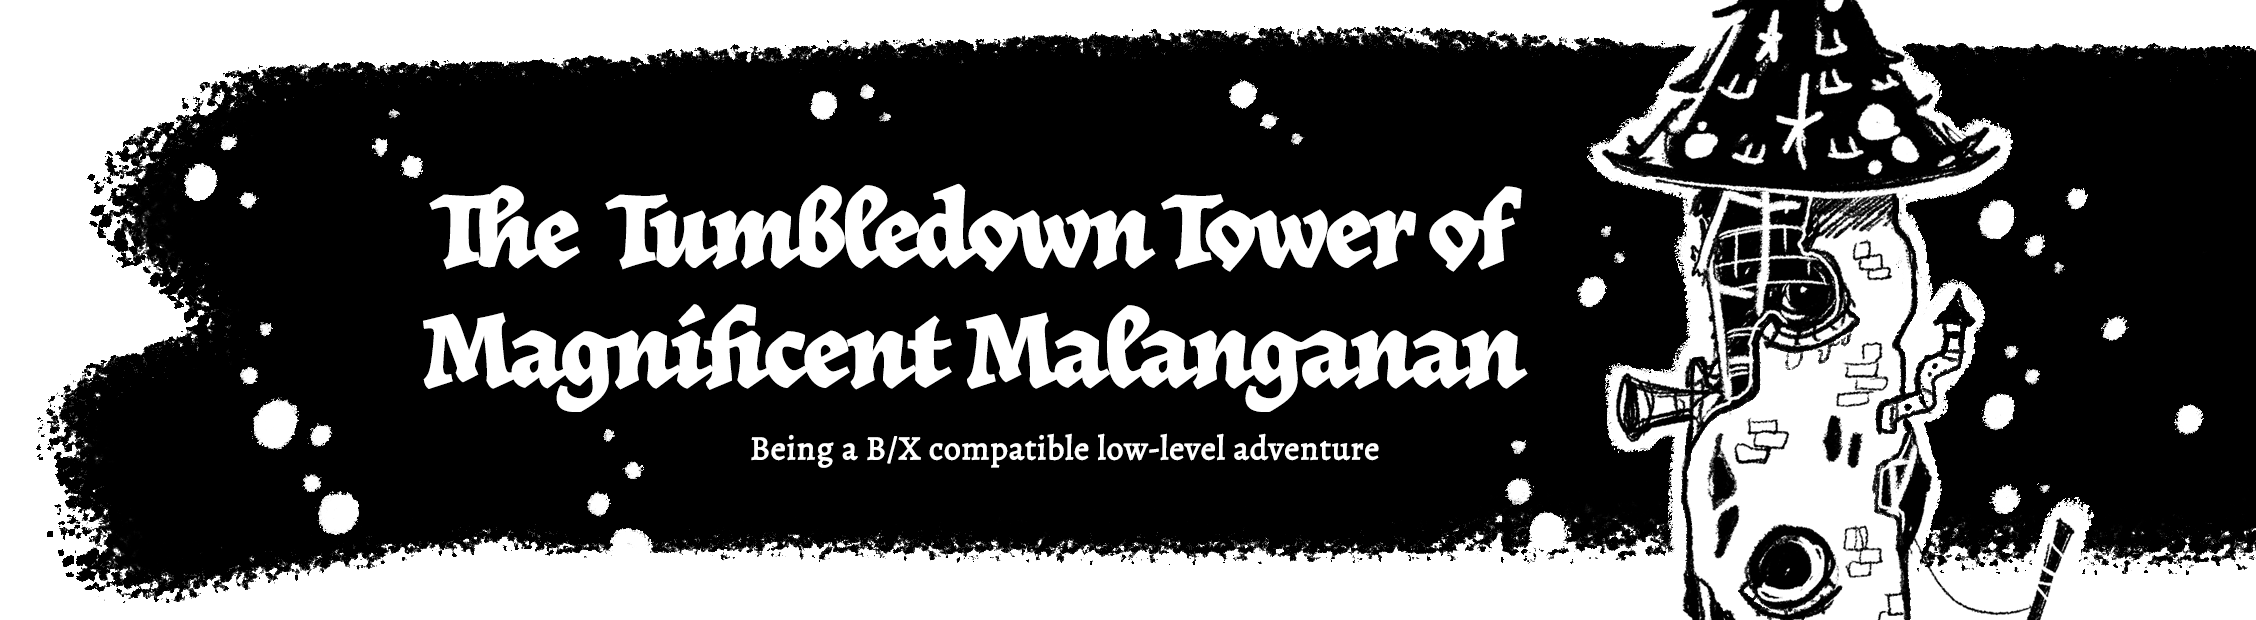 The Tumbledown Tower of Magnificent Malanganan